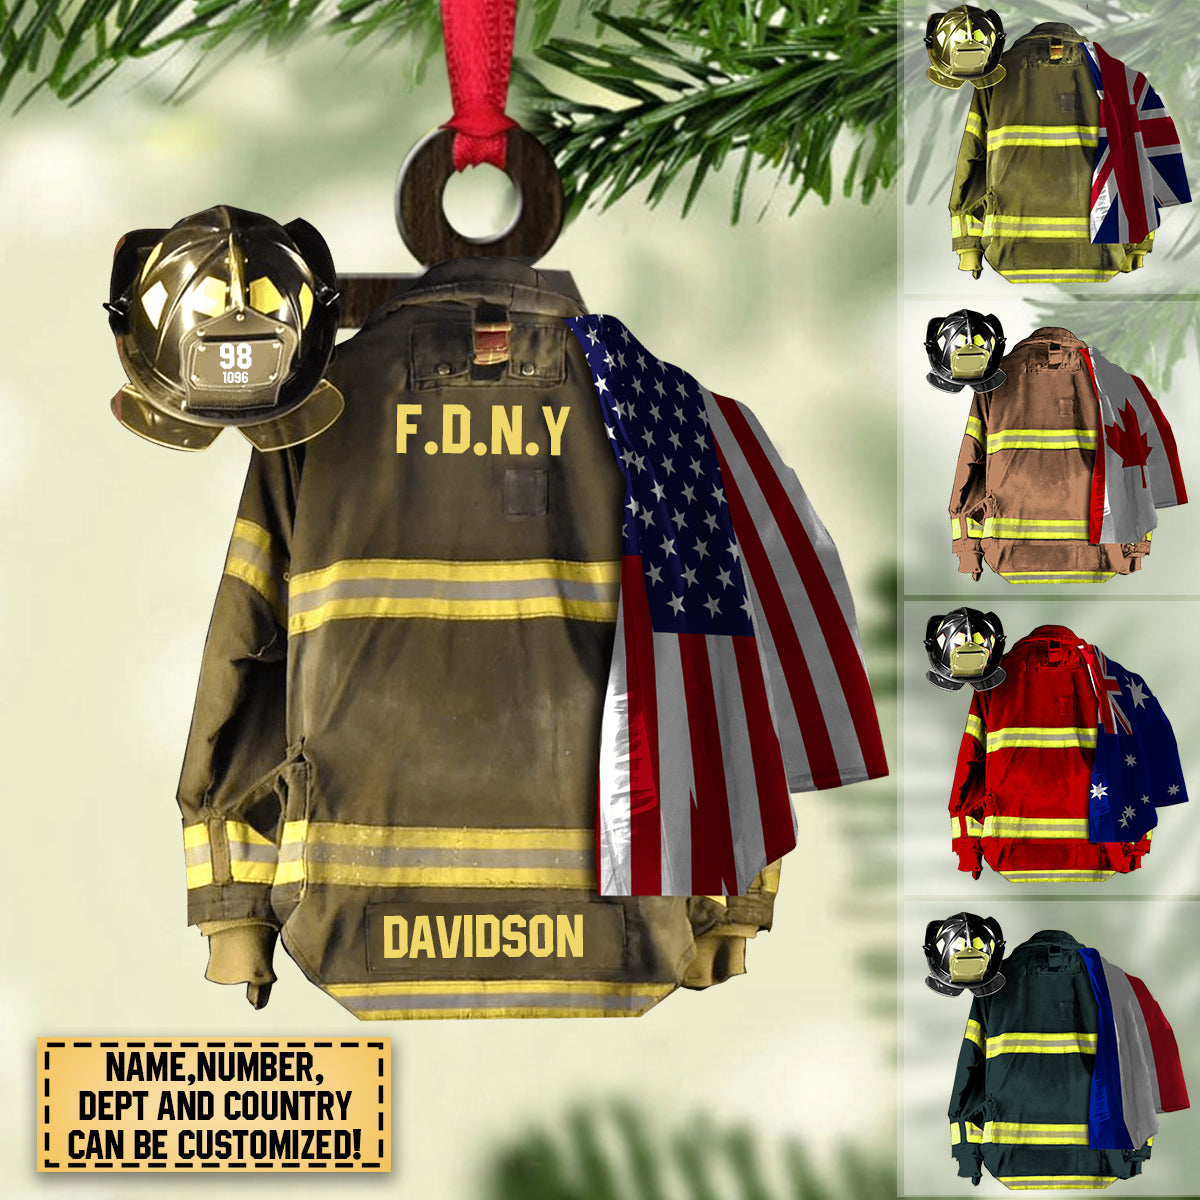 PERSONALIZED FIRE DEPARTMENT HANGING ORNAMENT